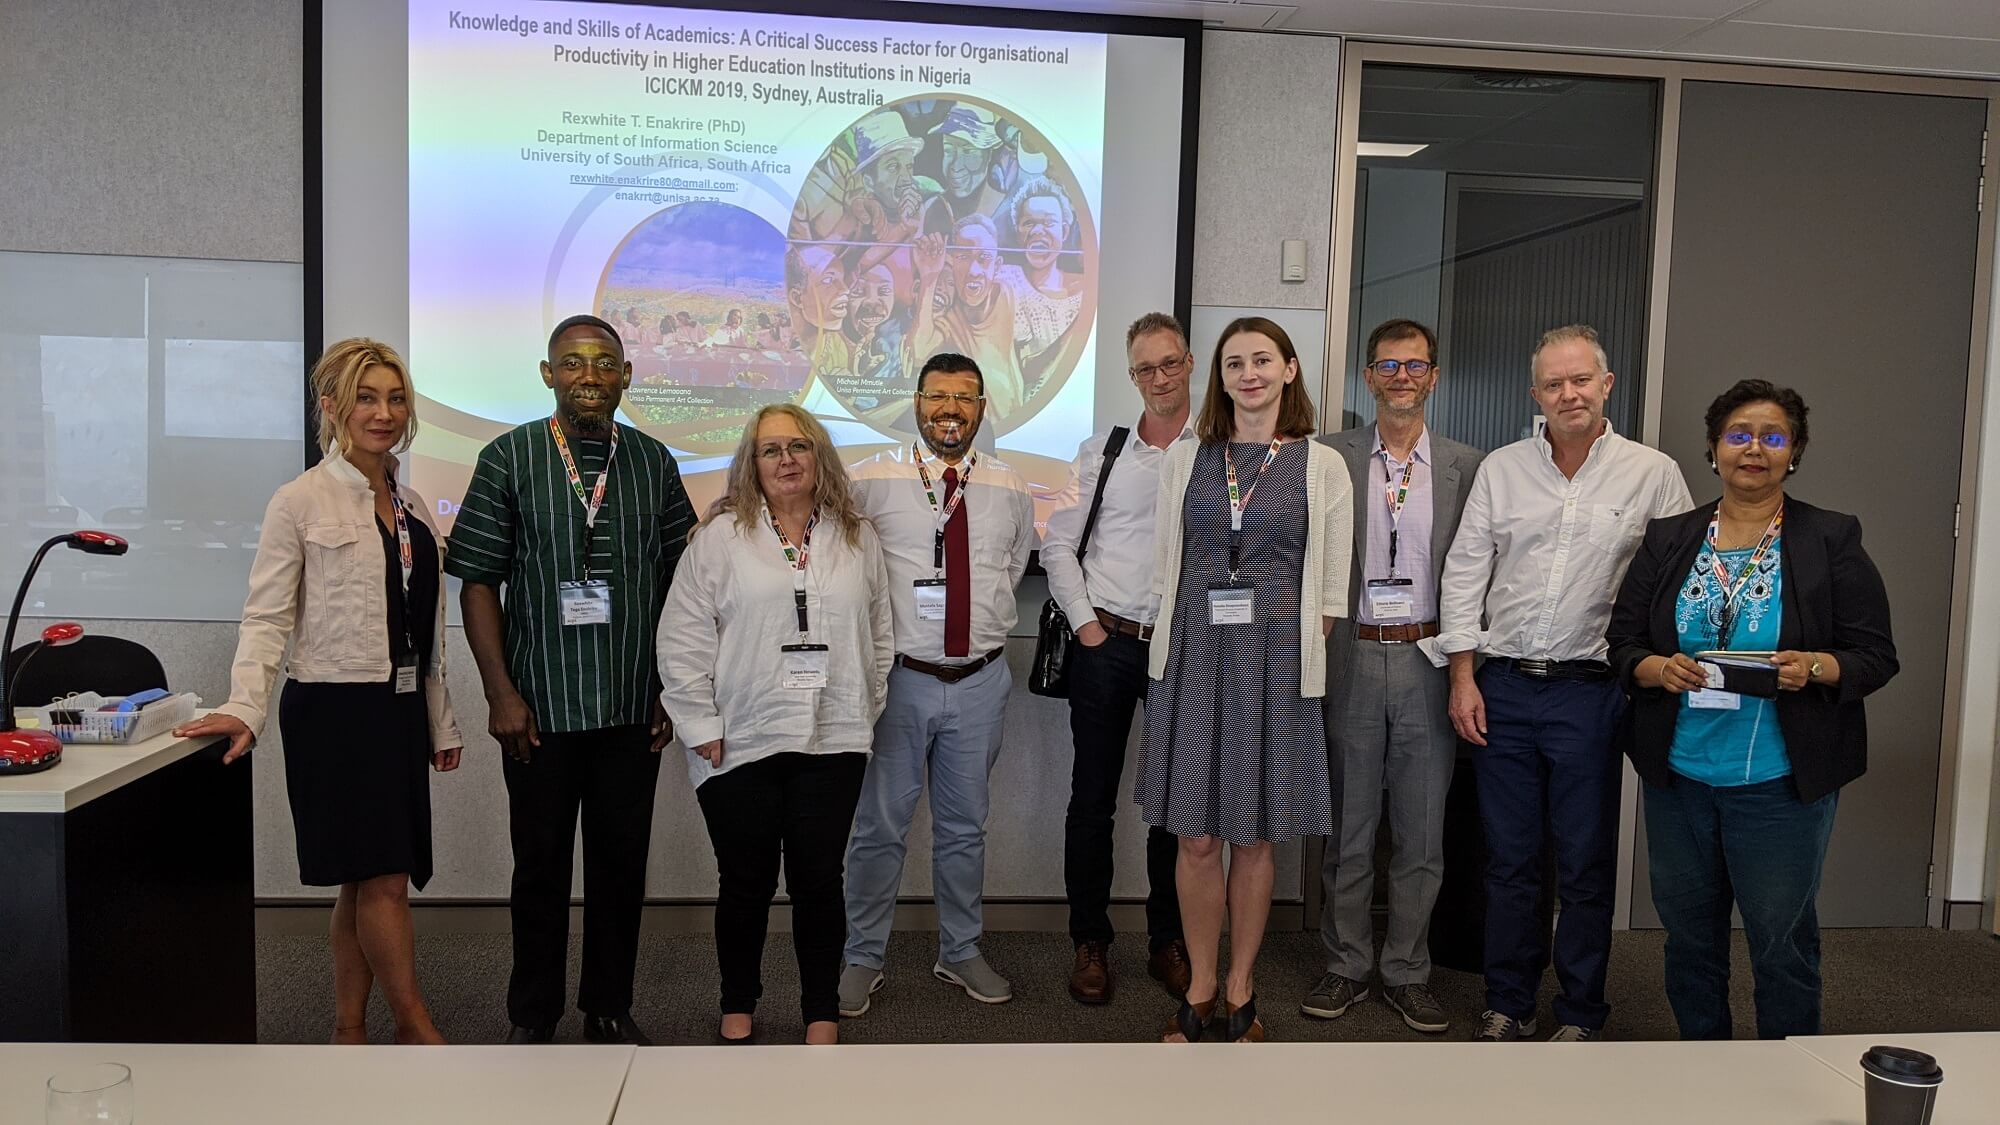 Near East University was Represented at an International Conference (ICICKM) hosted by Macquarie University in Sydney, Australia